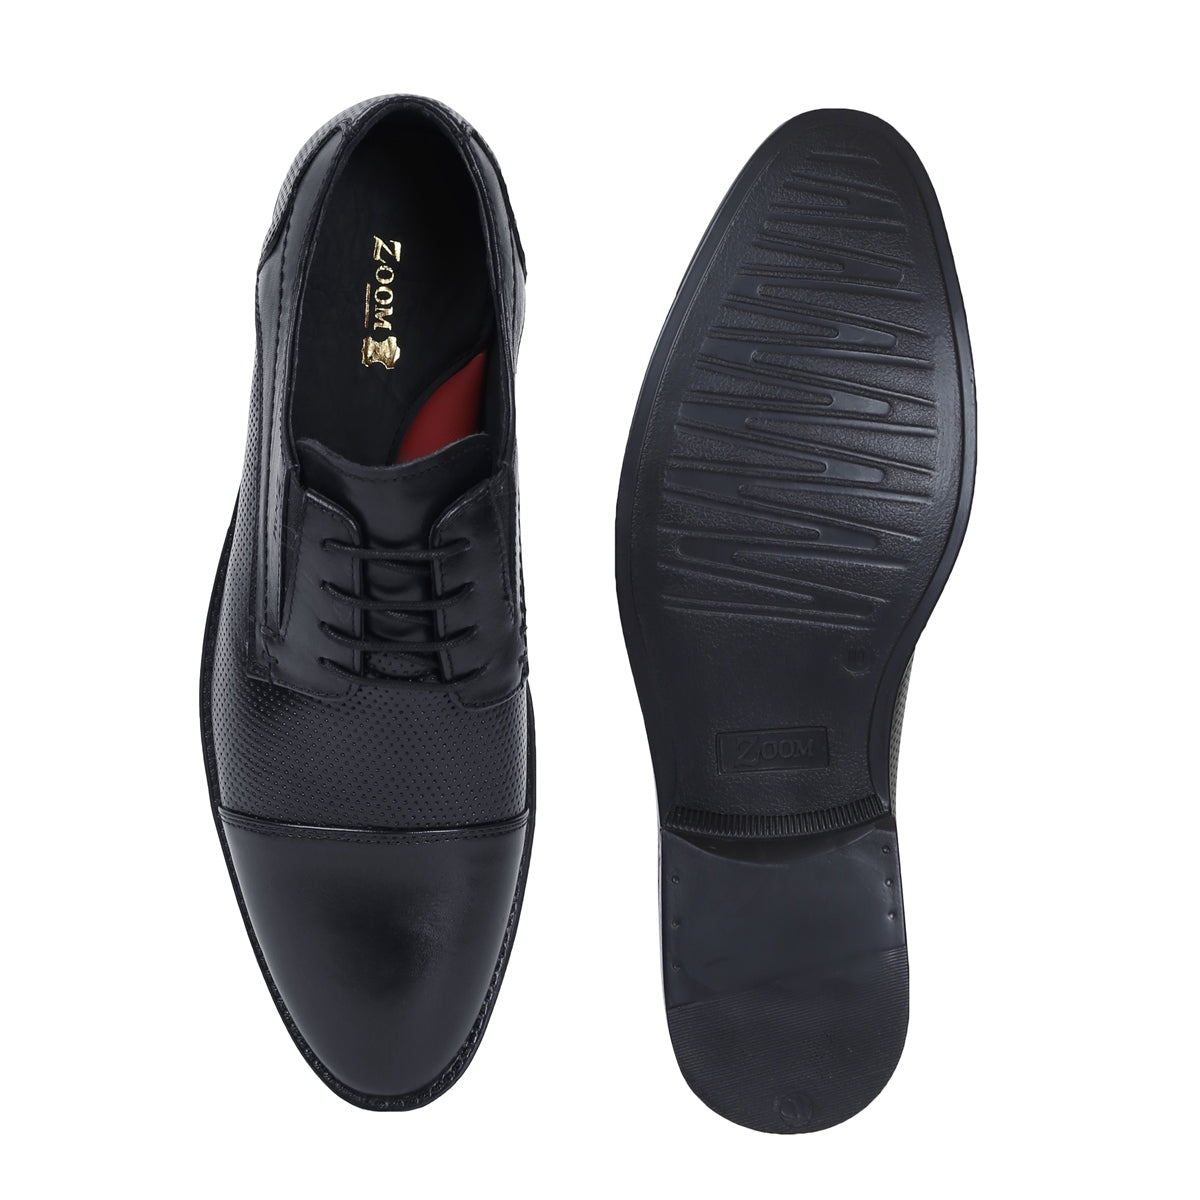 Black Shoes, Formal Shoes, Official Shoes for Men By -Free Walkers Footwear  Corporate Casuals For Men Price in India - Buy Black Shoes, Formal Shoes,  Official Shoes for Men By -Free Walkers